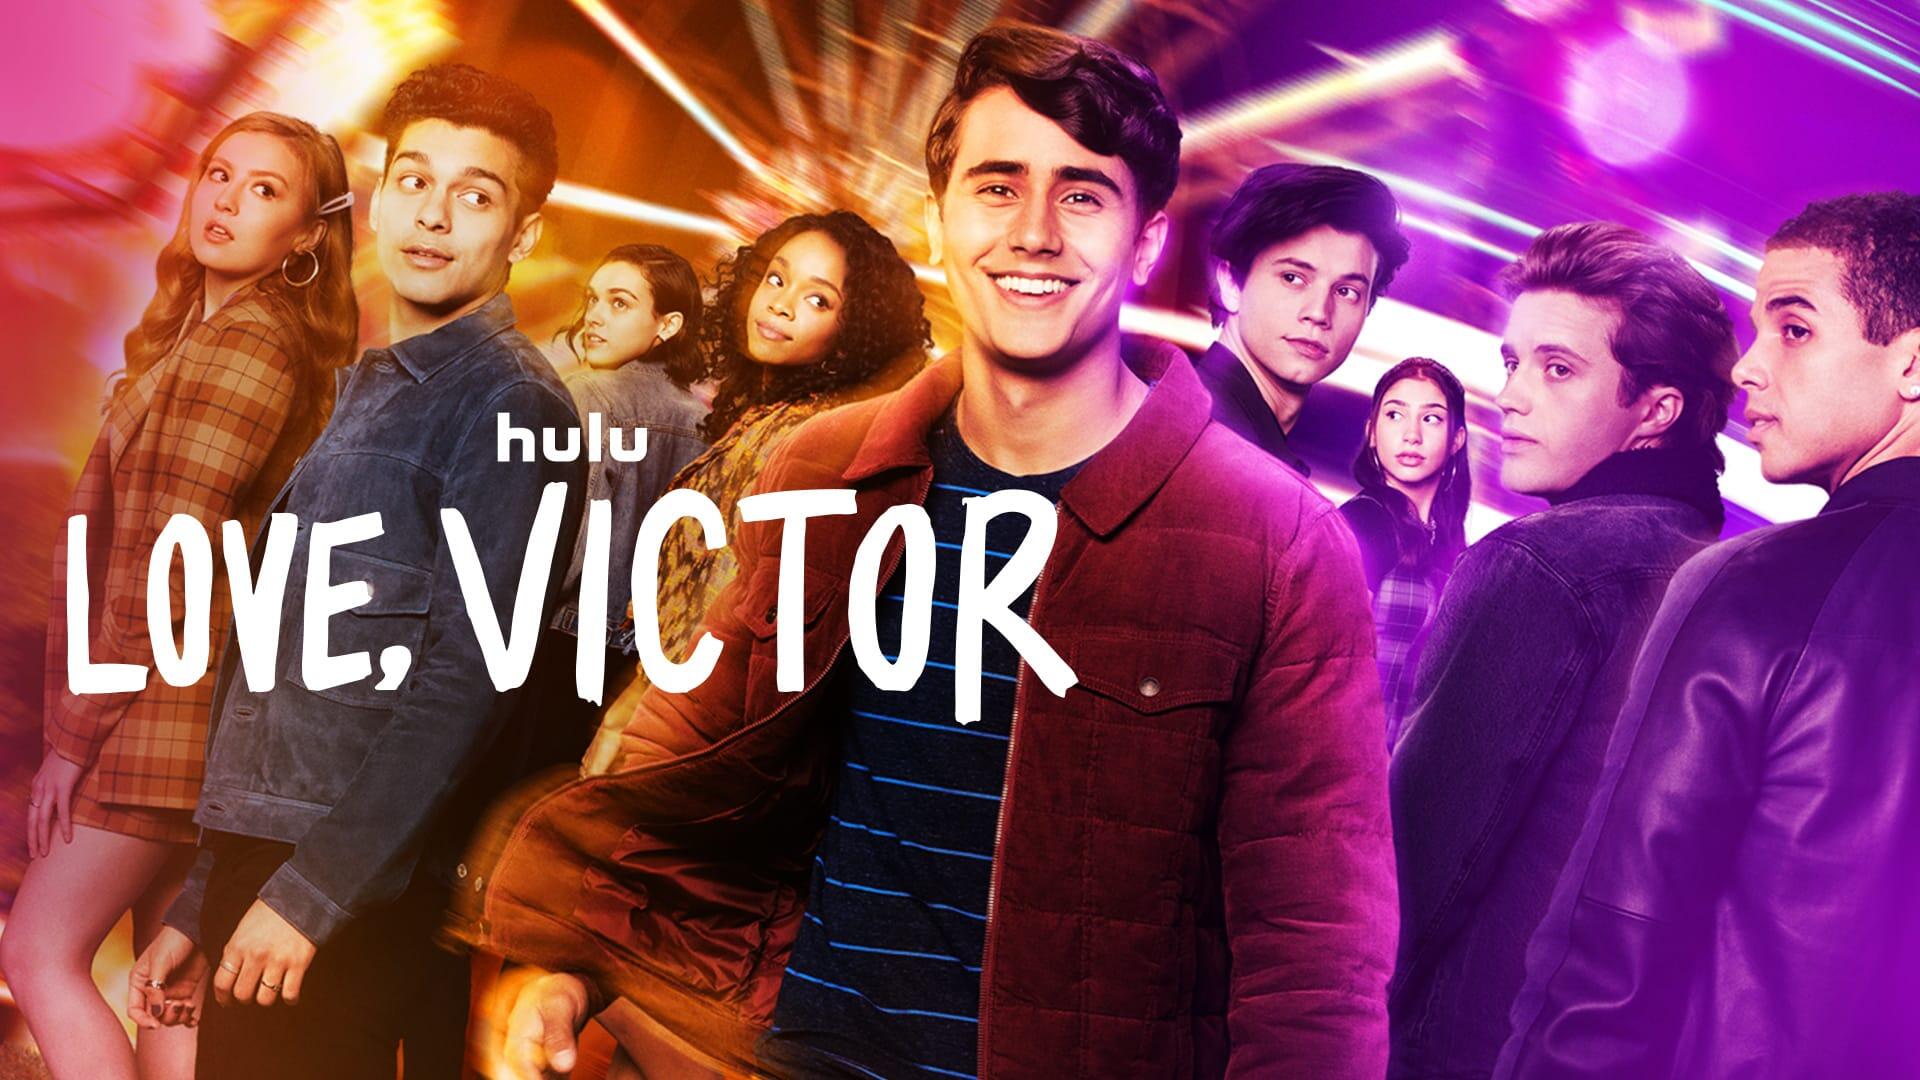 Love, Victor -- Season 3 -- This season finds Victor going on a journey of self-discovery -- not only deciding who he wants to be with, but more broadly, who he wants to be. With their post-high-school-plans looming, Victor and his friends are faced with a new set of problems that they must work through to make the best choices for their futures. Lake (Bebe Wood), Rahim (Anthony Keyvan), Lucy (Ava Capri), Mia (Rachel Hilson), Victor (Michael Cimino), Felix (Anthony Turpel), Pilar (Isabella Ferreira), Benji (George Sear) and Andrew (Mason Gooding), shown. (Courtesy of Hulu)